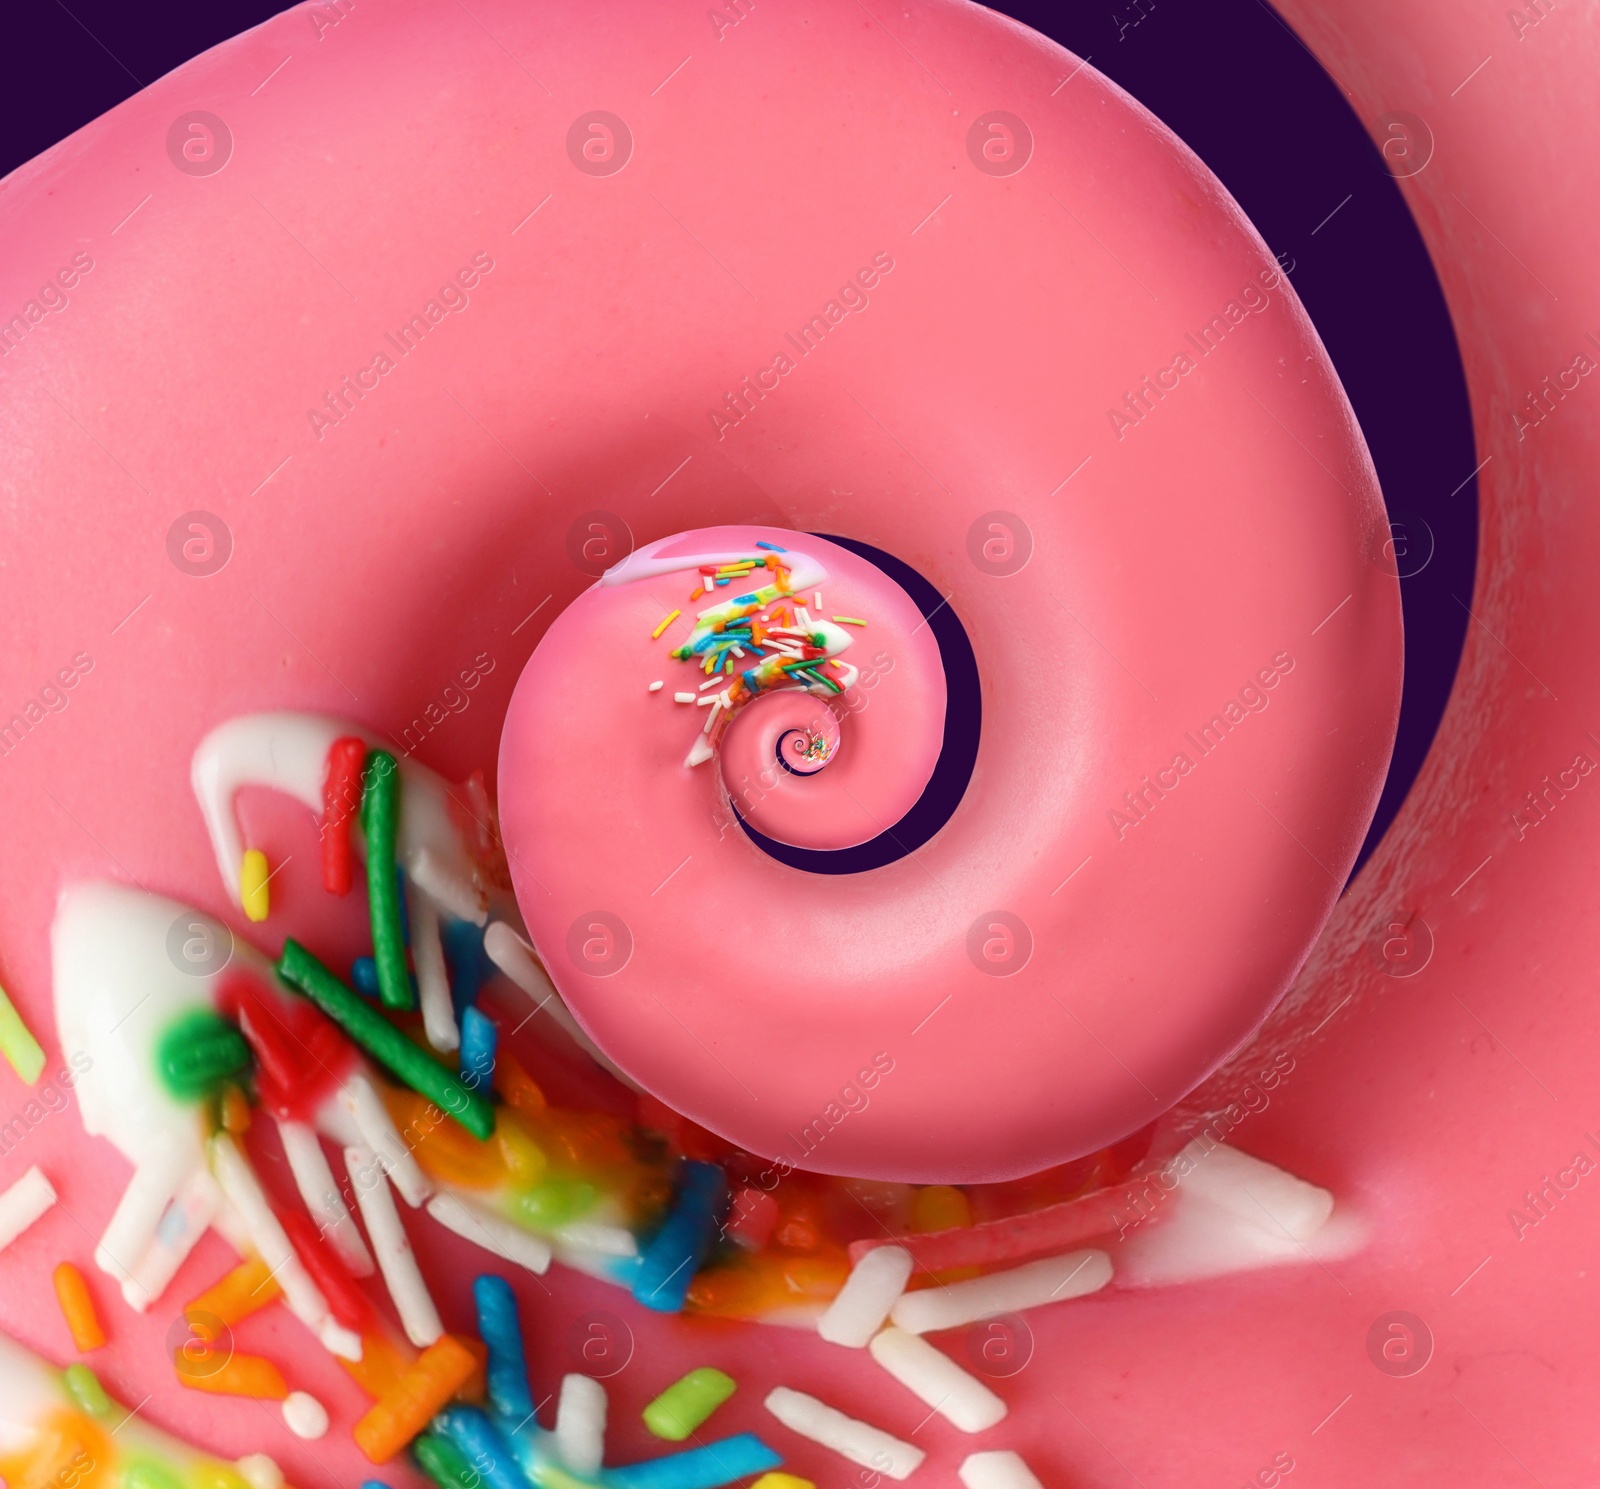 Image of Twisted donut with strawberry icing and sprinkles on purple background, spiral effect